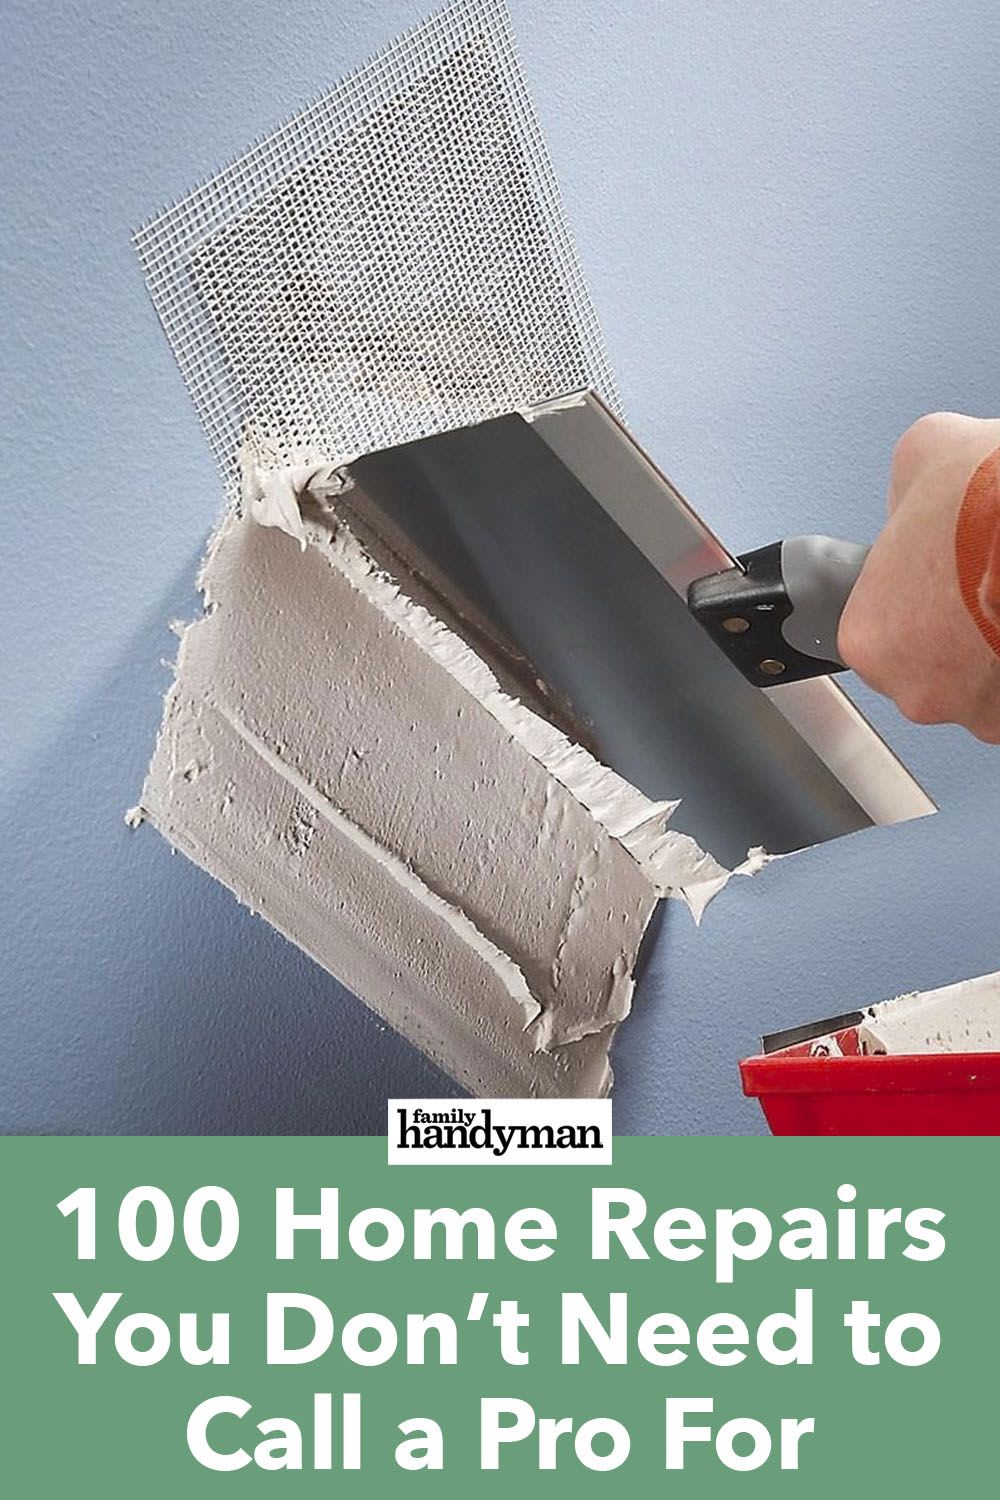 100 Home Repairs You Don’t Need to Call a Pro For